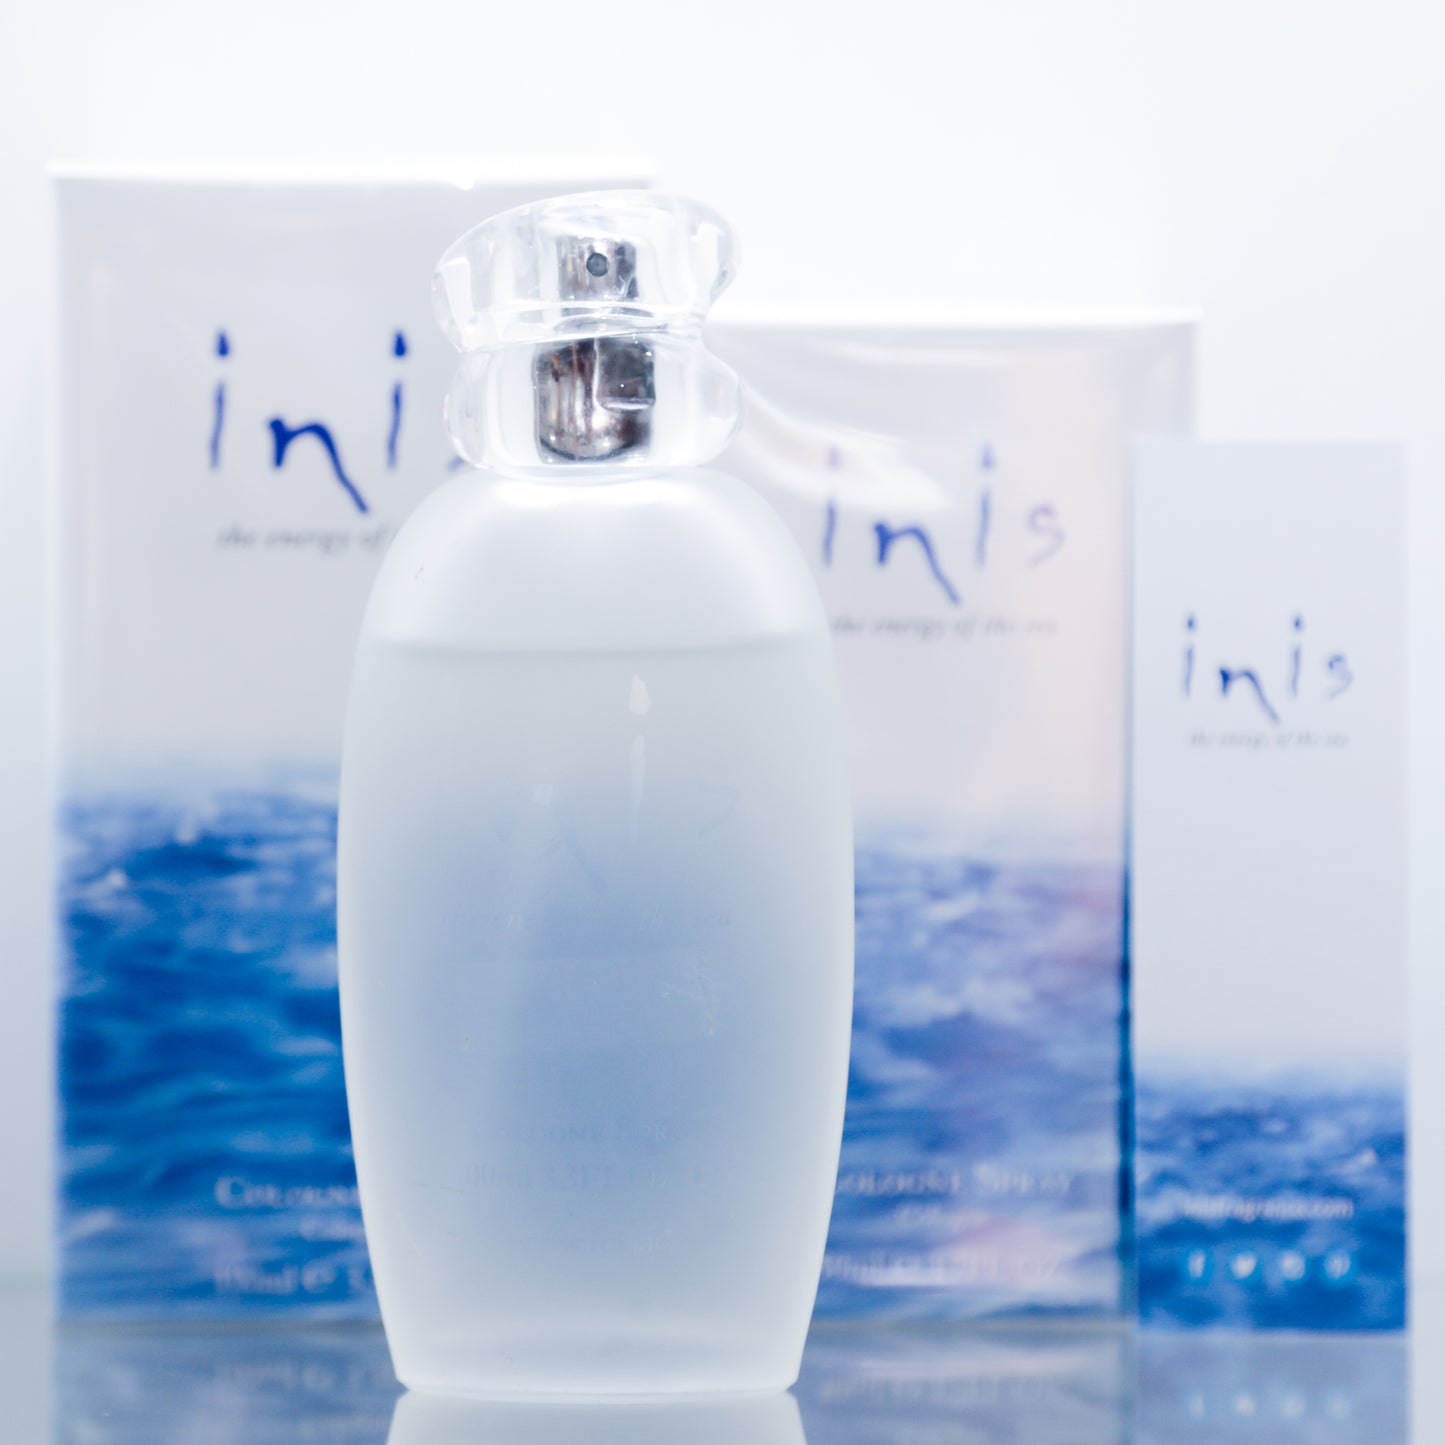 Inis Unisex Cologne